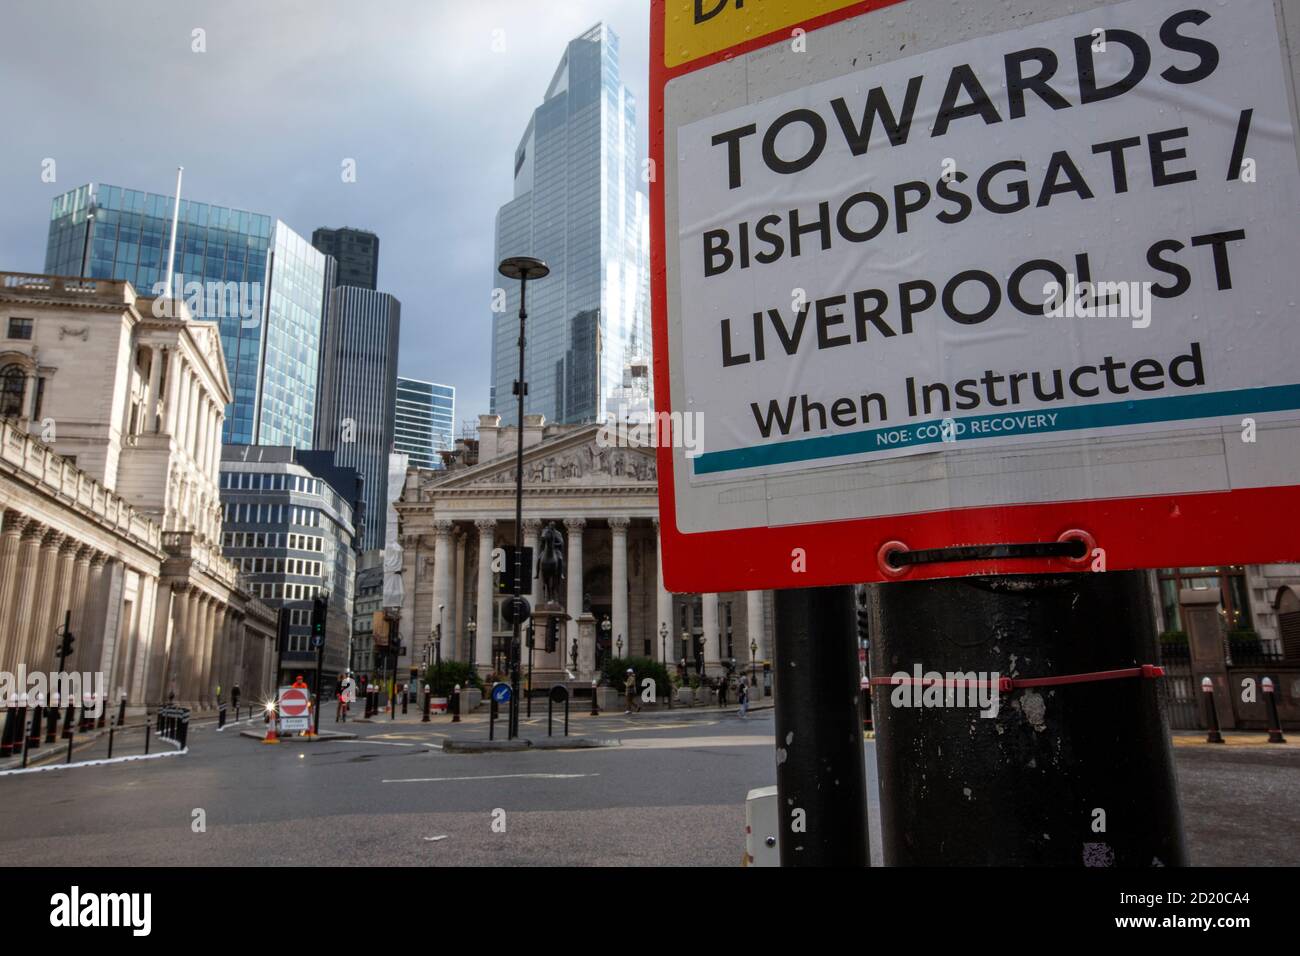 A quiet Bank Junction overlooking Bank of England and the Royal Exchange as a second coronavirus threatens the UK's economy, London, England, UK Stock Photo